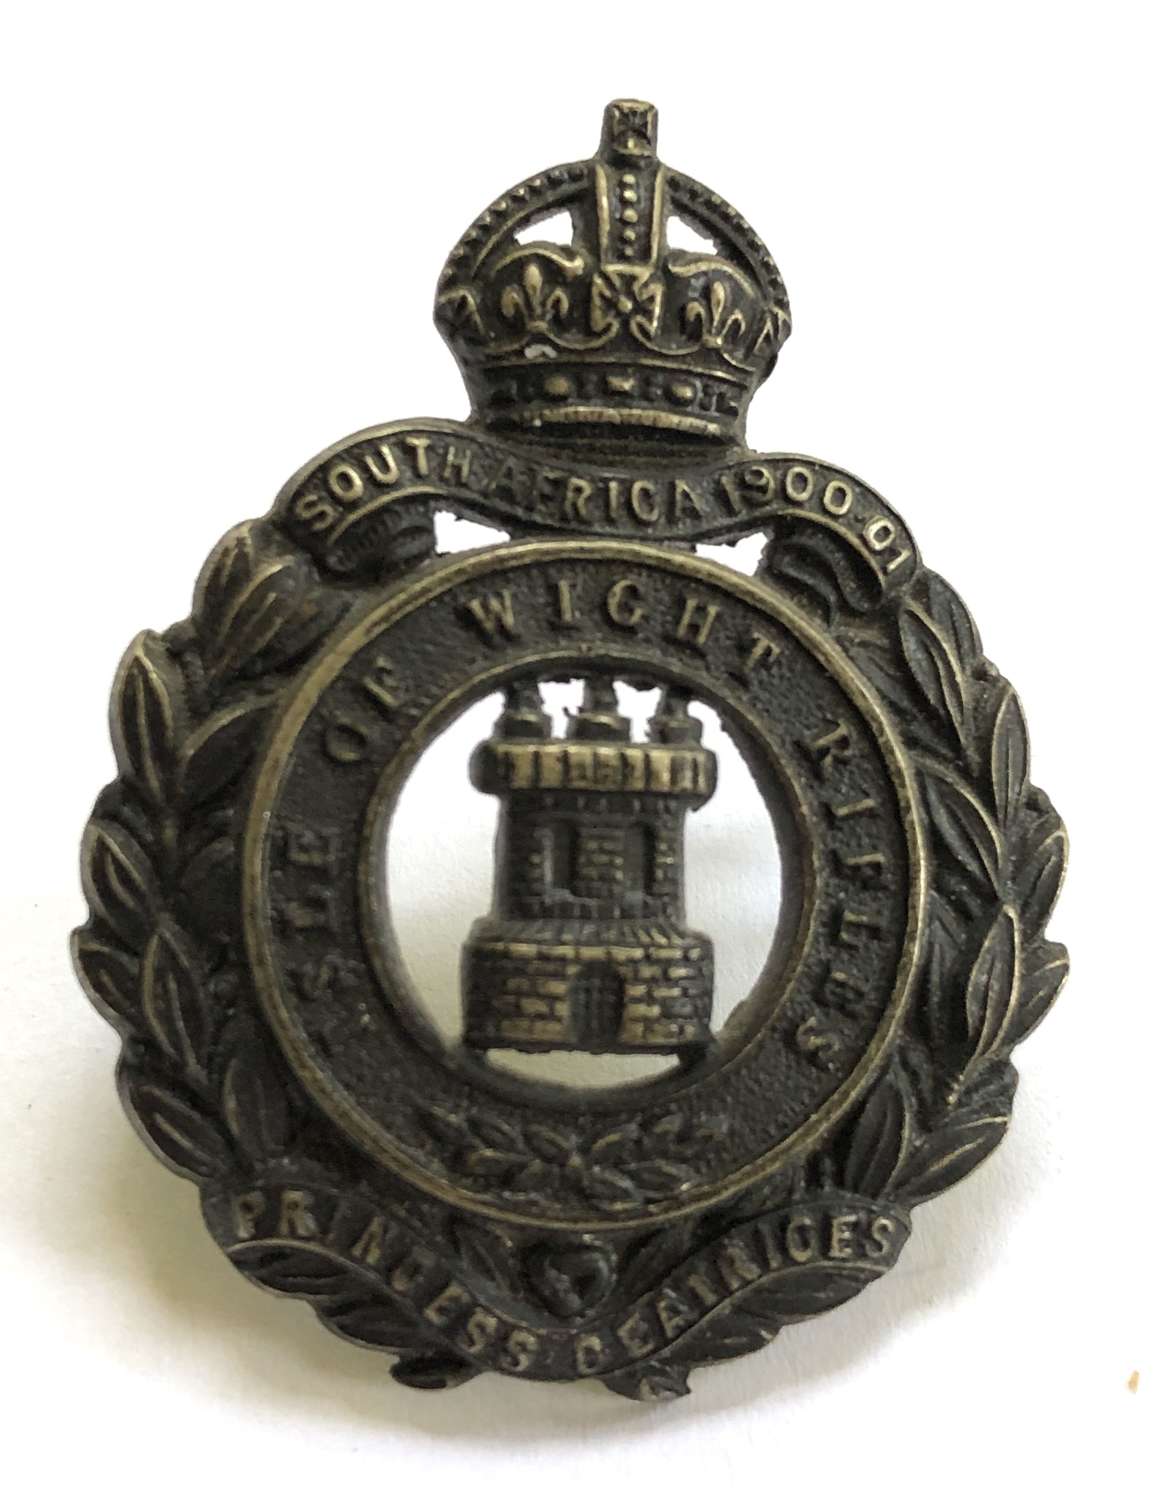 Isle of Wight Rifles Officer's cap badge